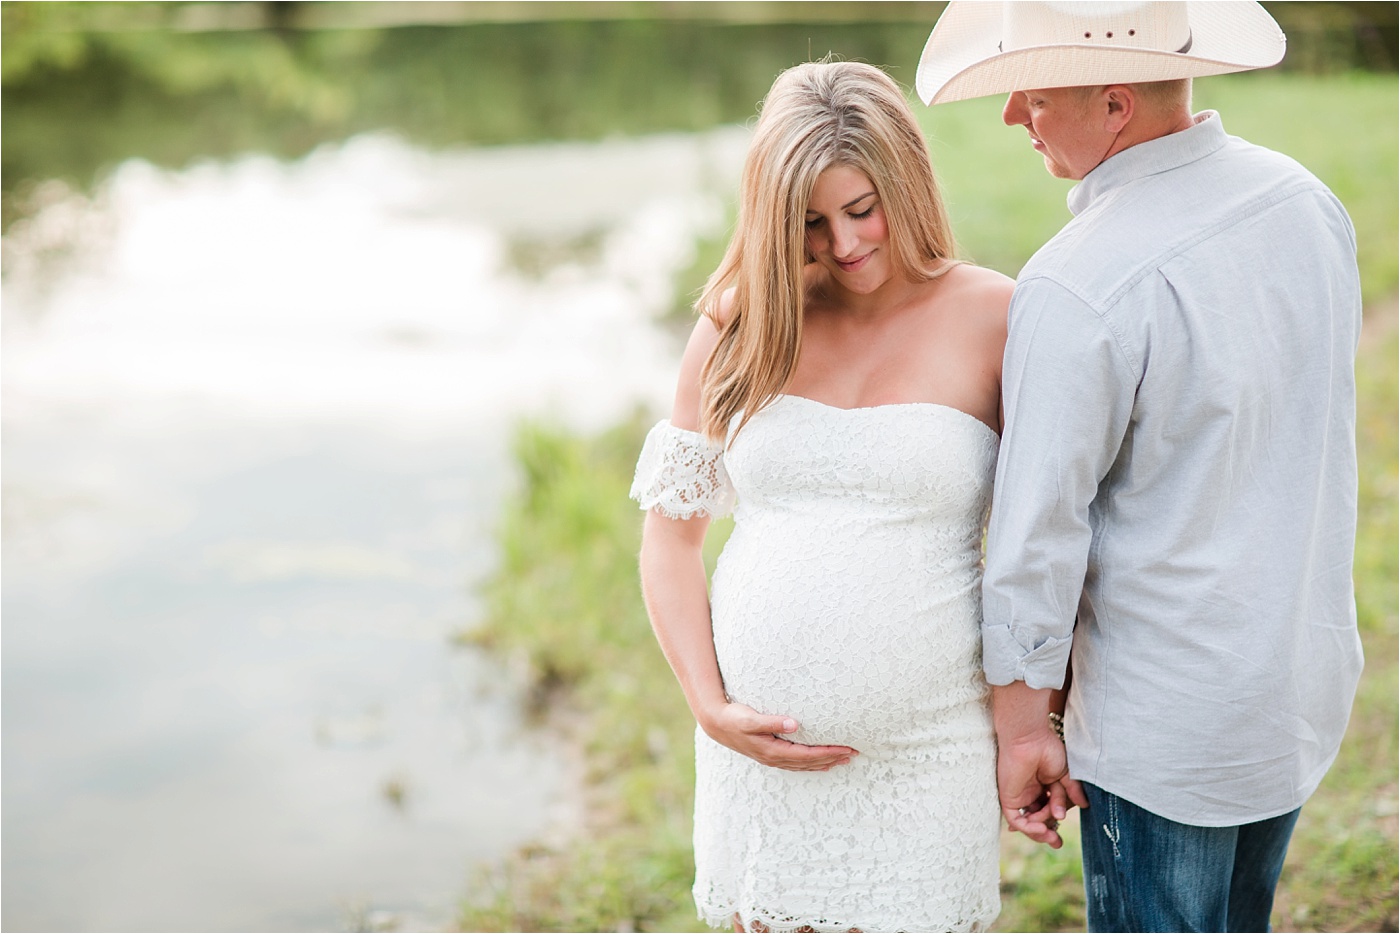 country side maternity session | KariMe Photography